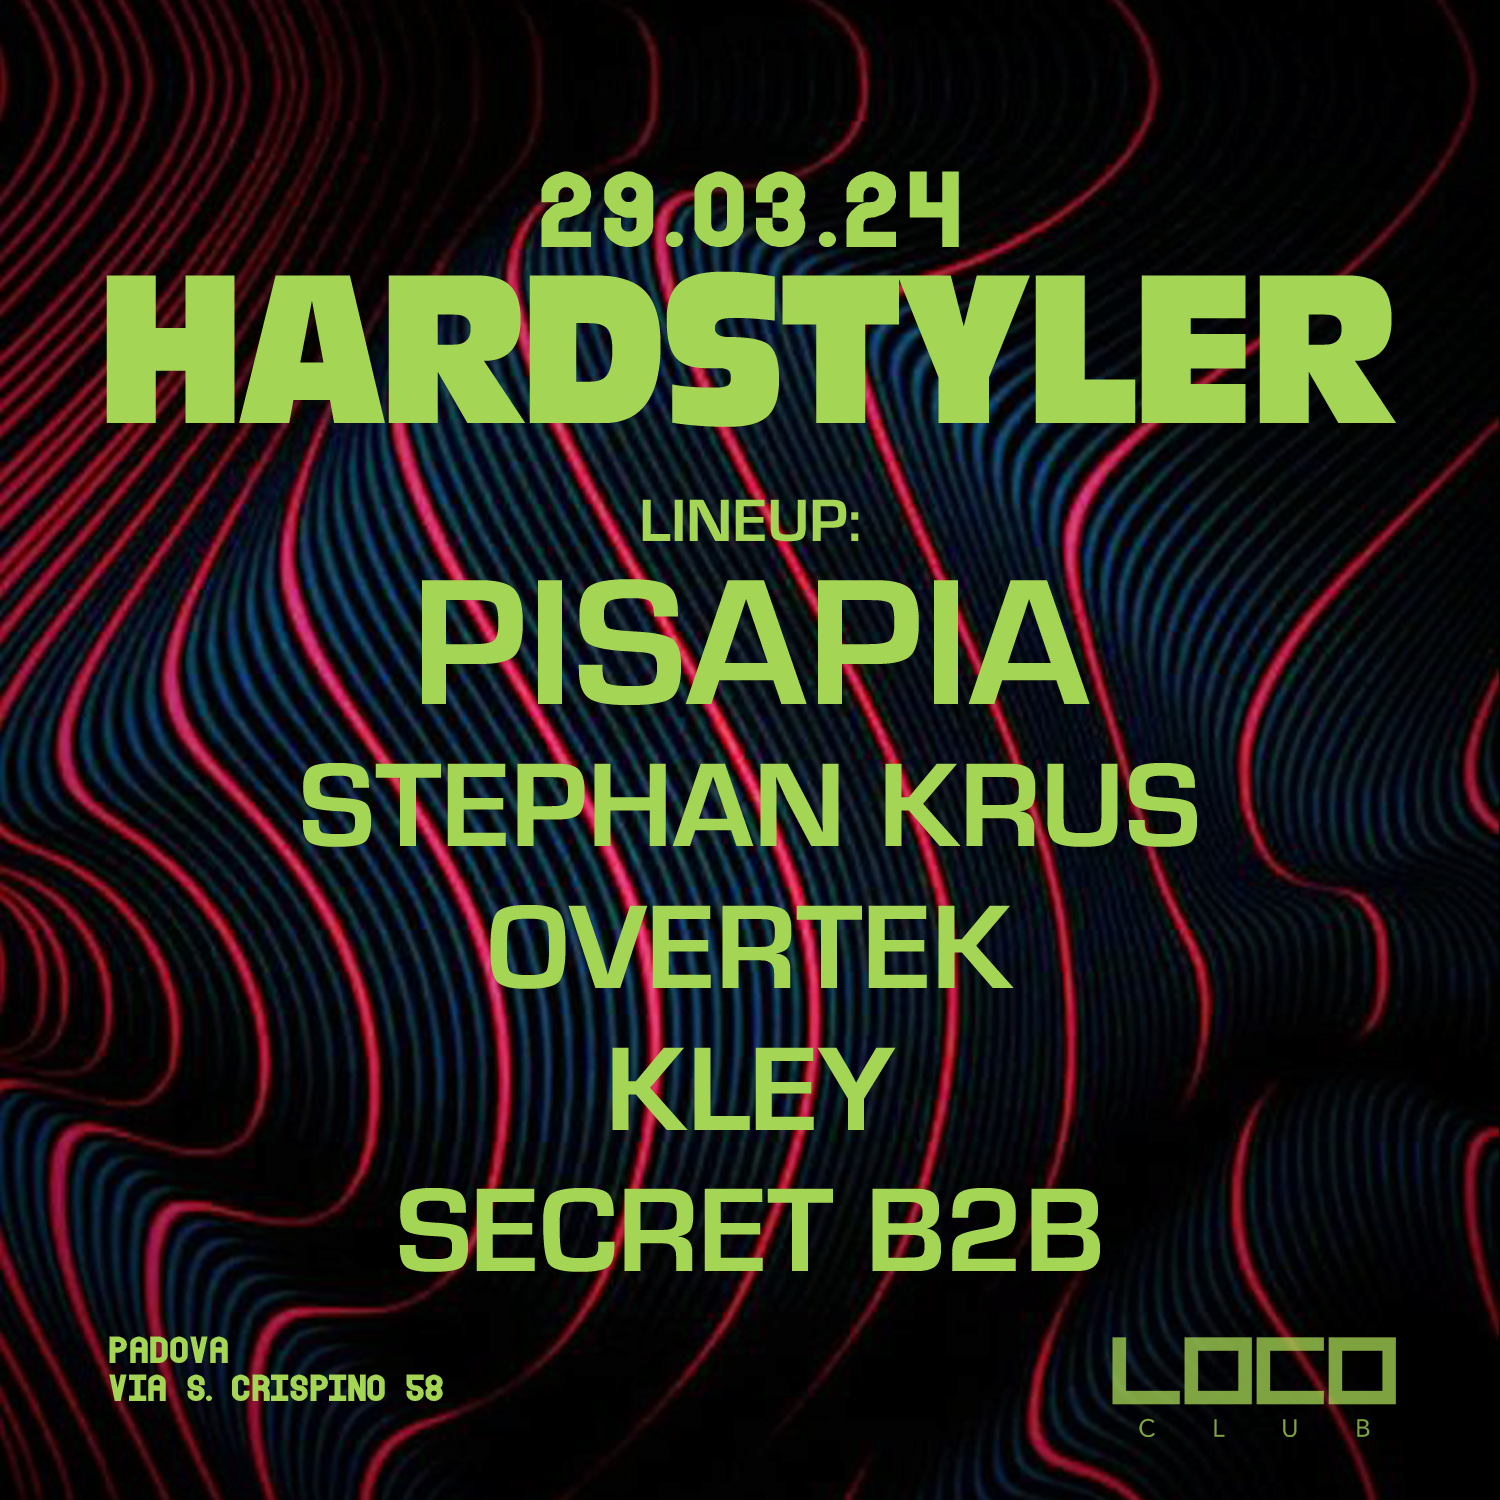 Hardstyler with Pisapia - フライヤー表